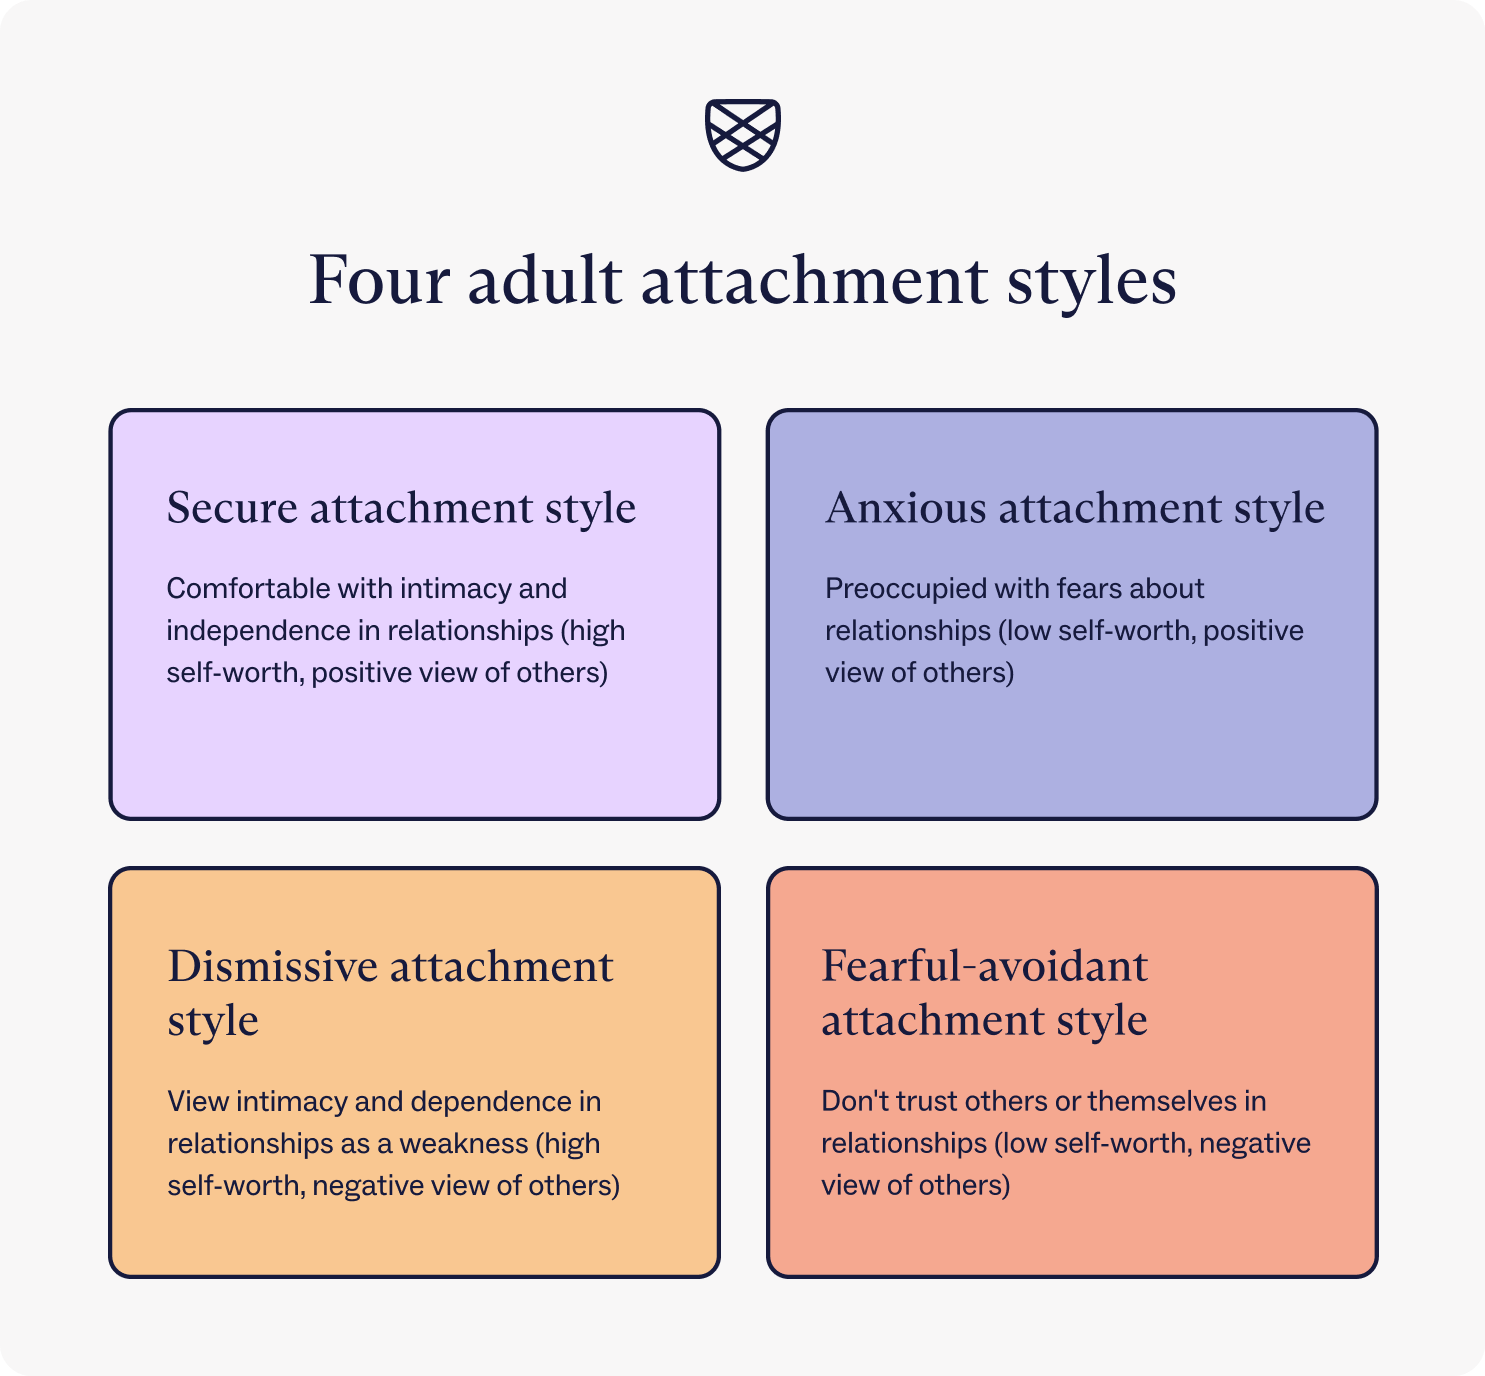 The four adult attachment styles